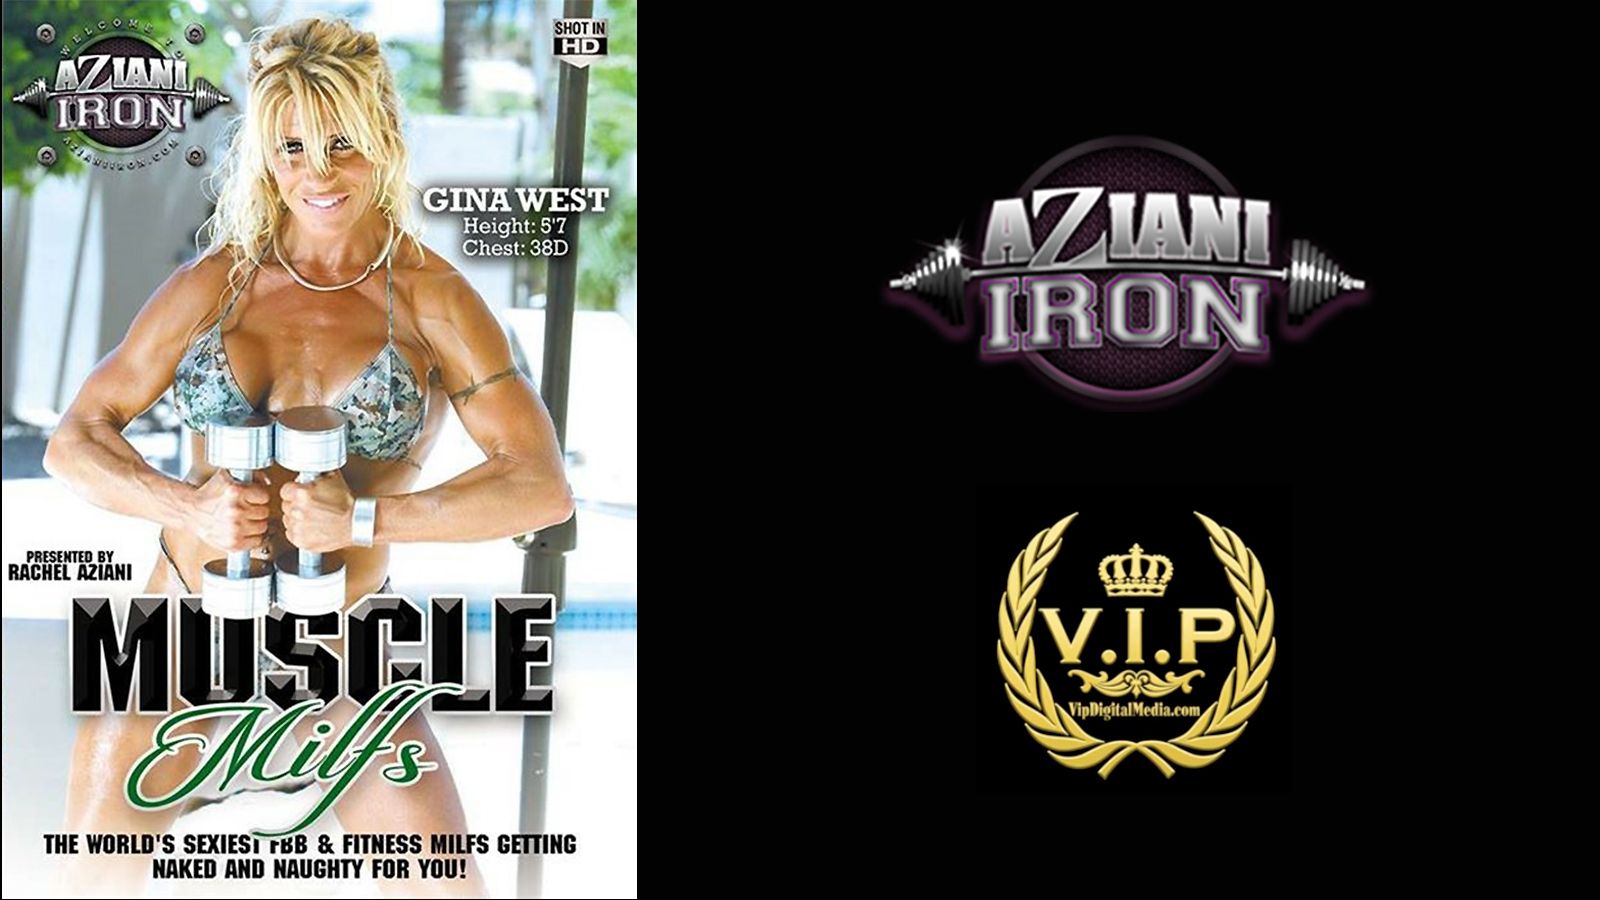 Aziani Iron Shows How Bodies Are Built In 'Muscle Milfs'